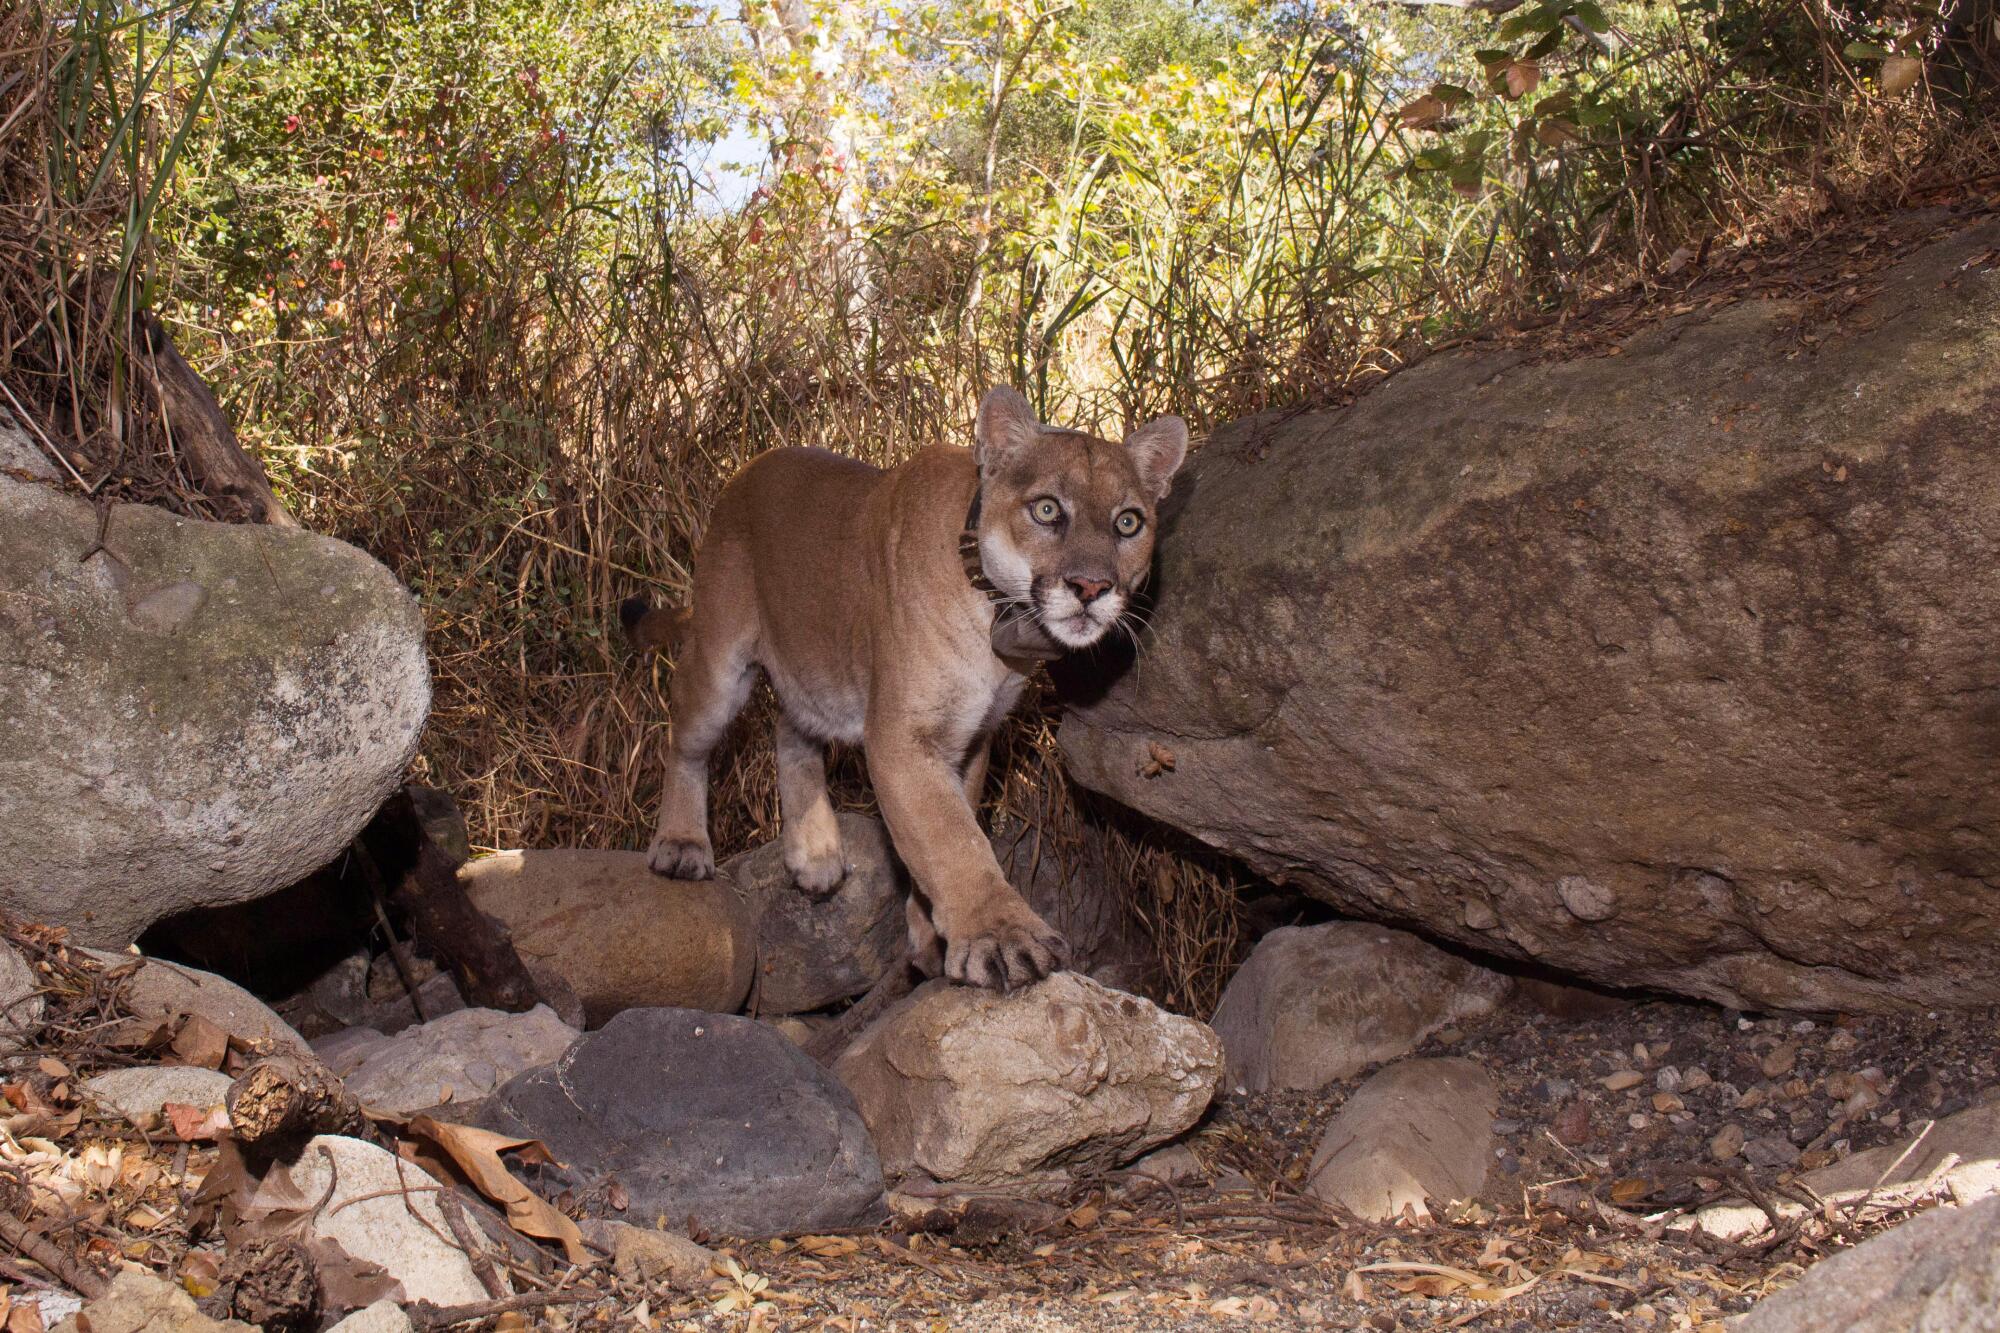 What's next for P-22, L.A.'s favorite bachelor mountain lion